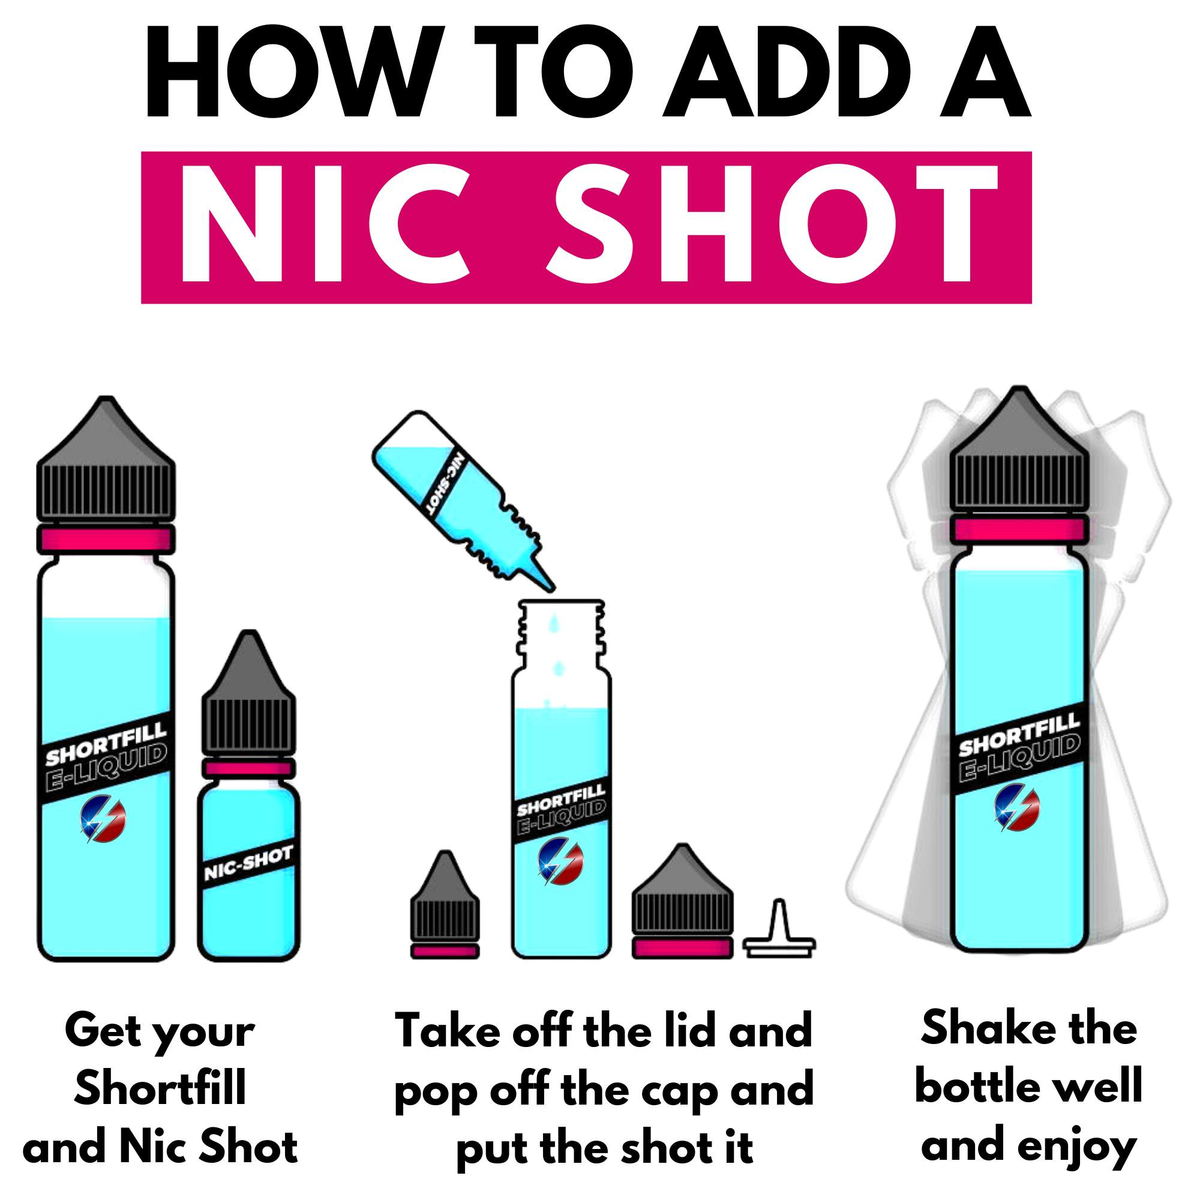 How to add a nic shot to a shortfill